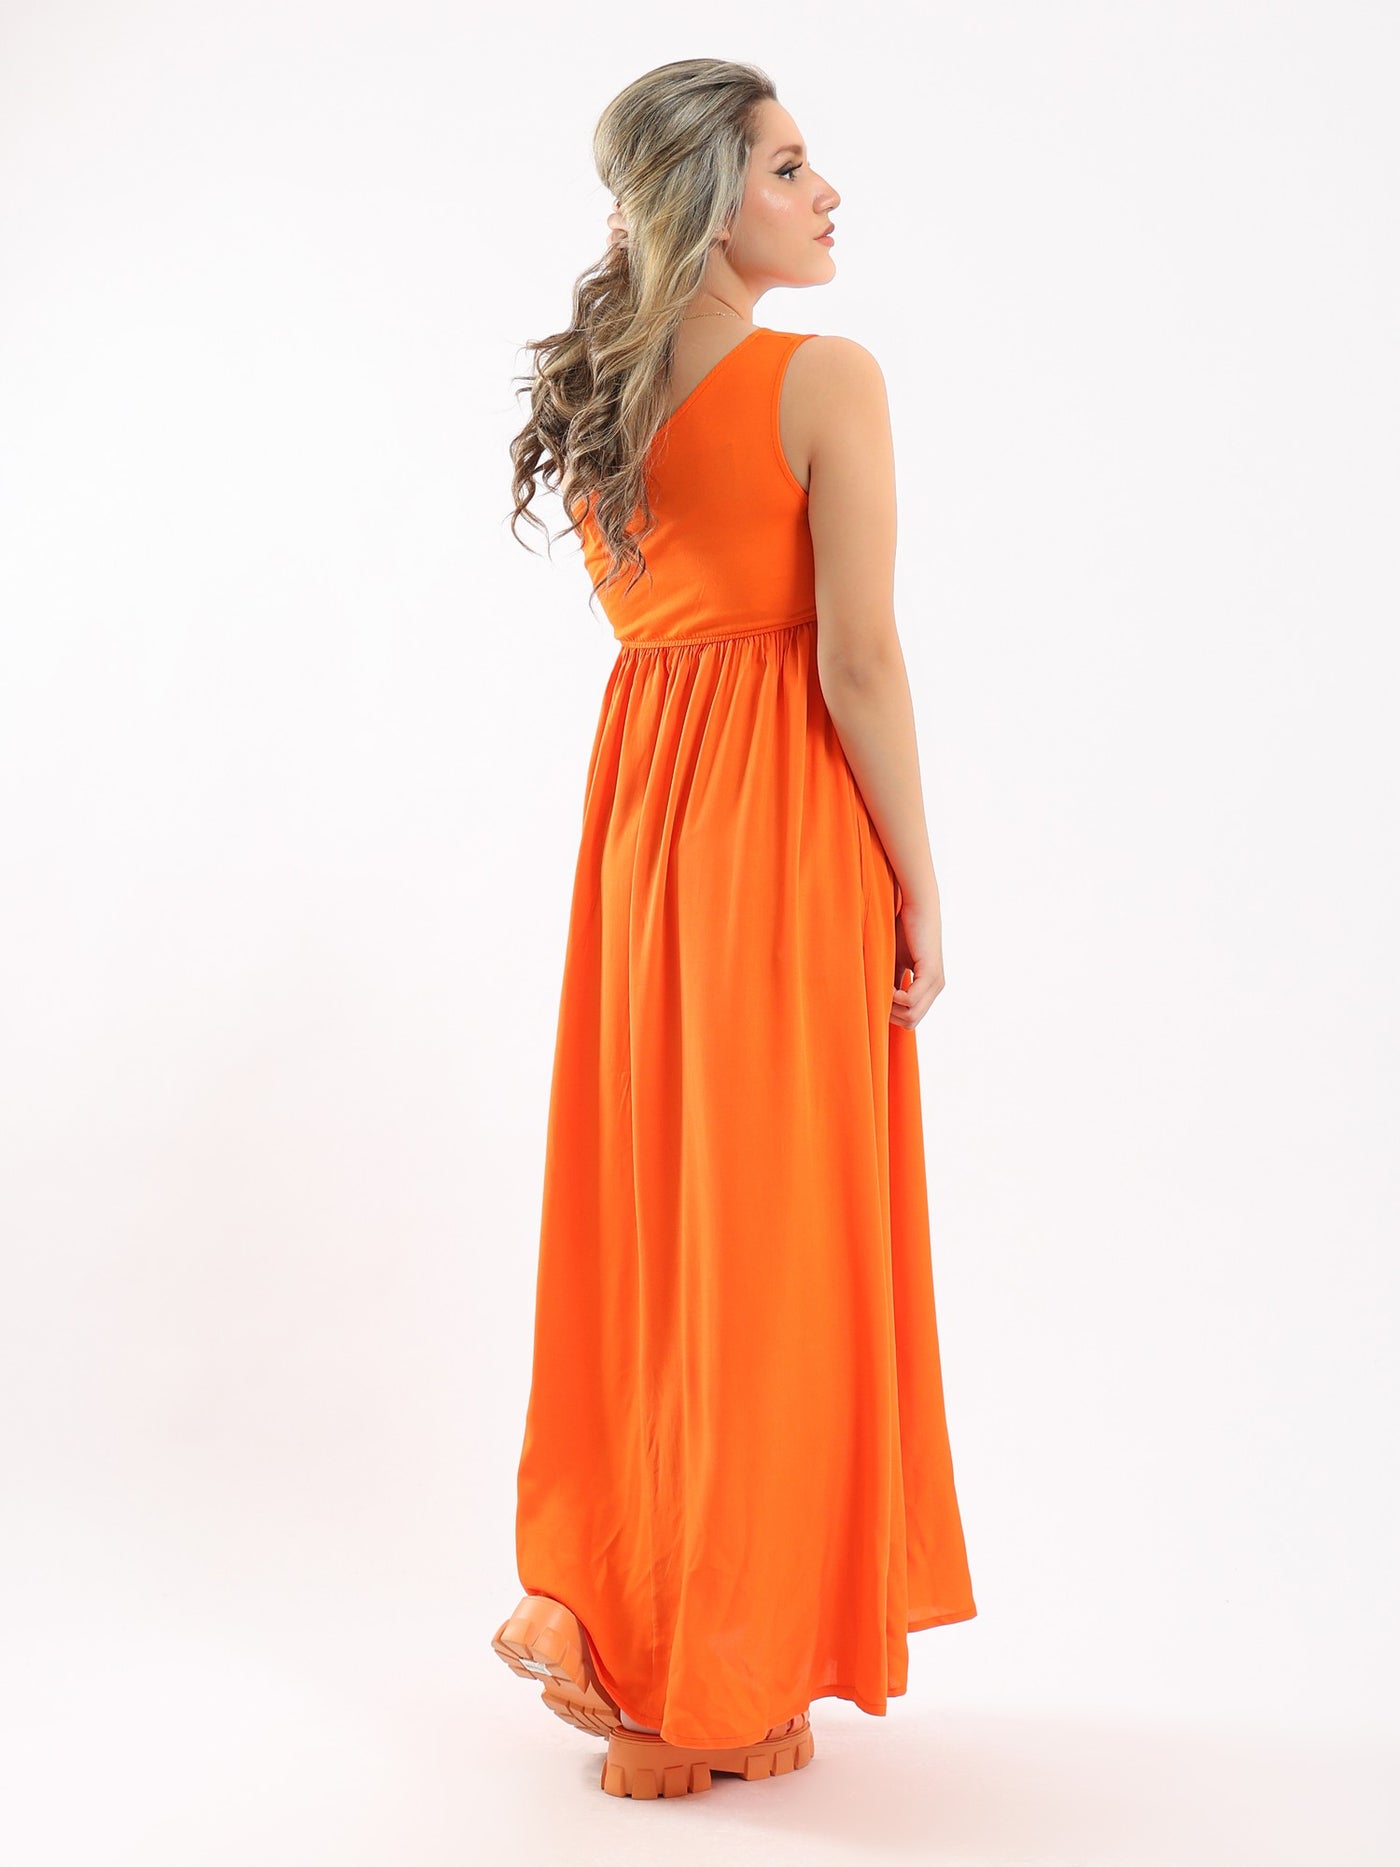 Dress - One Shoulder - Pleated